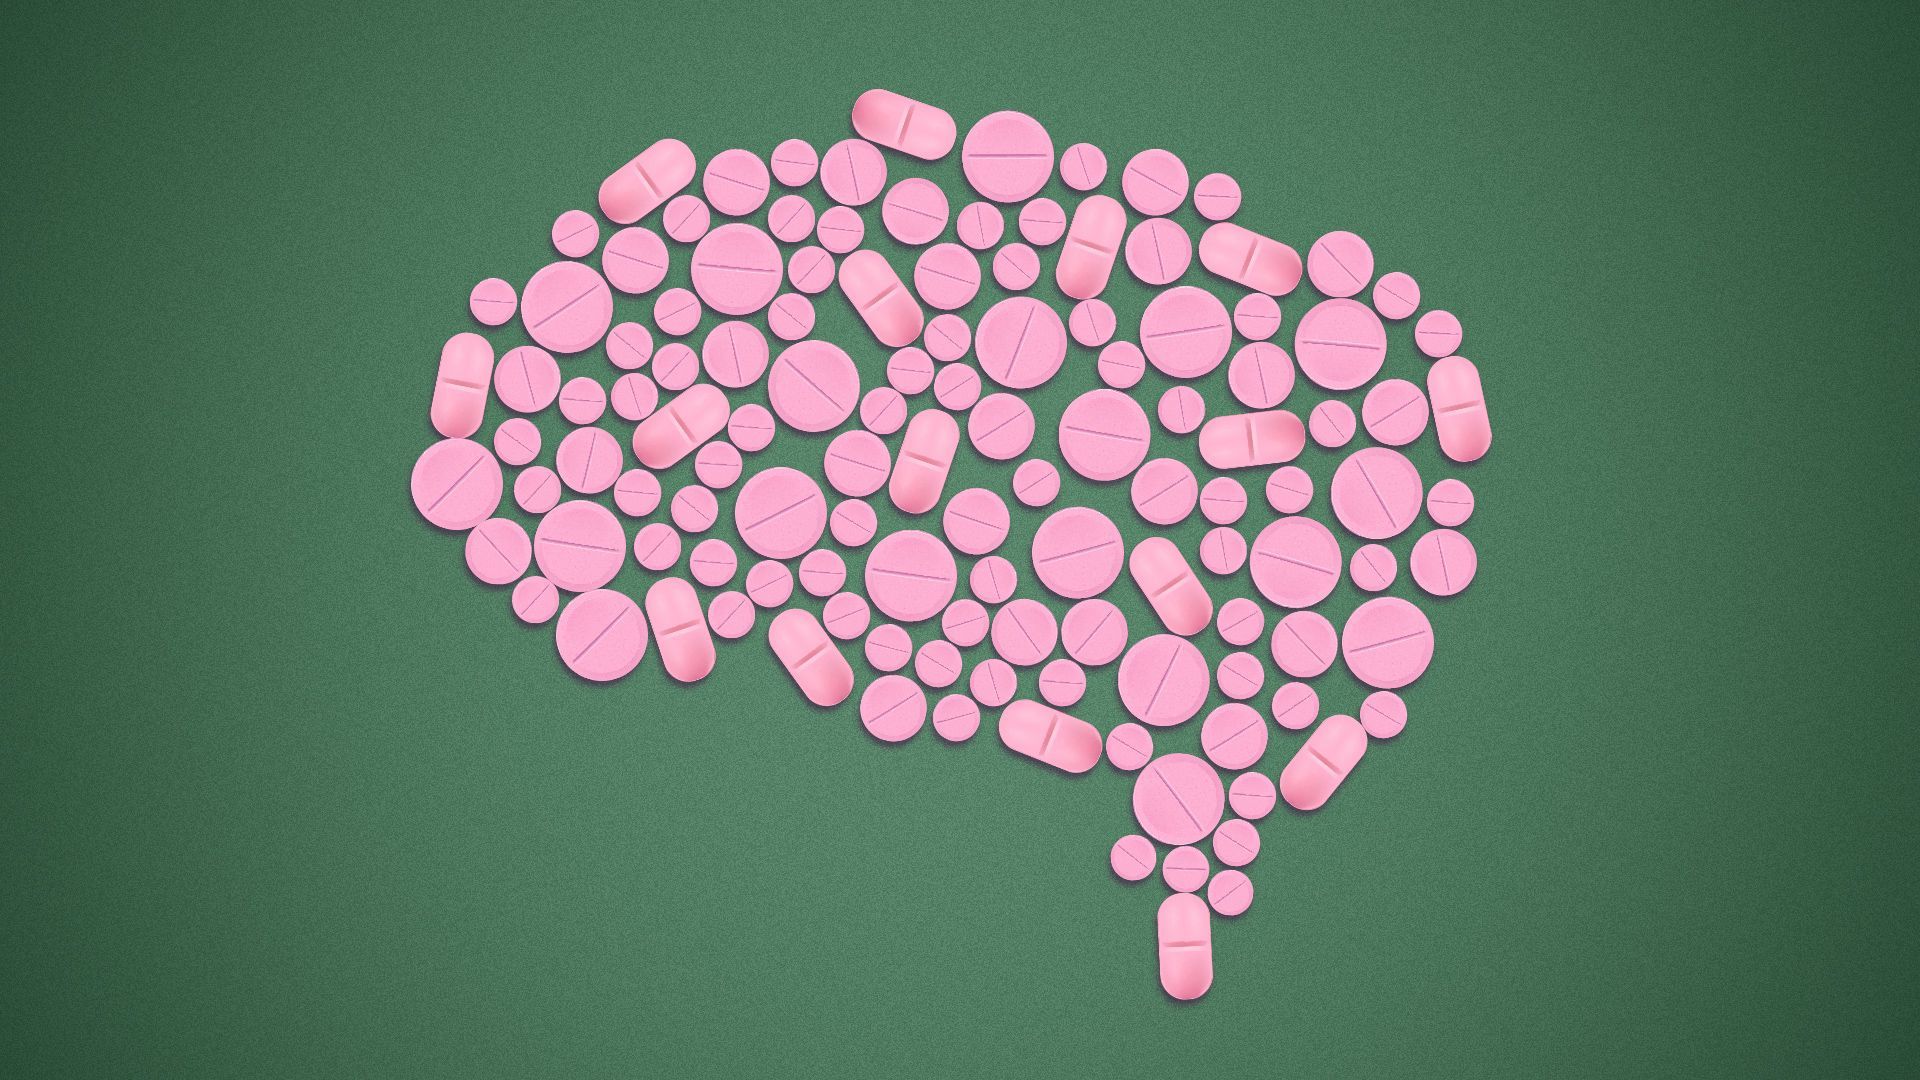 Illustration of a brain made up of different sizes and types of pink pills.